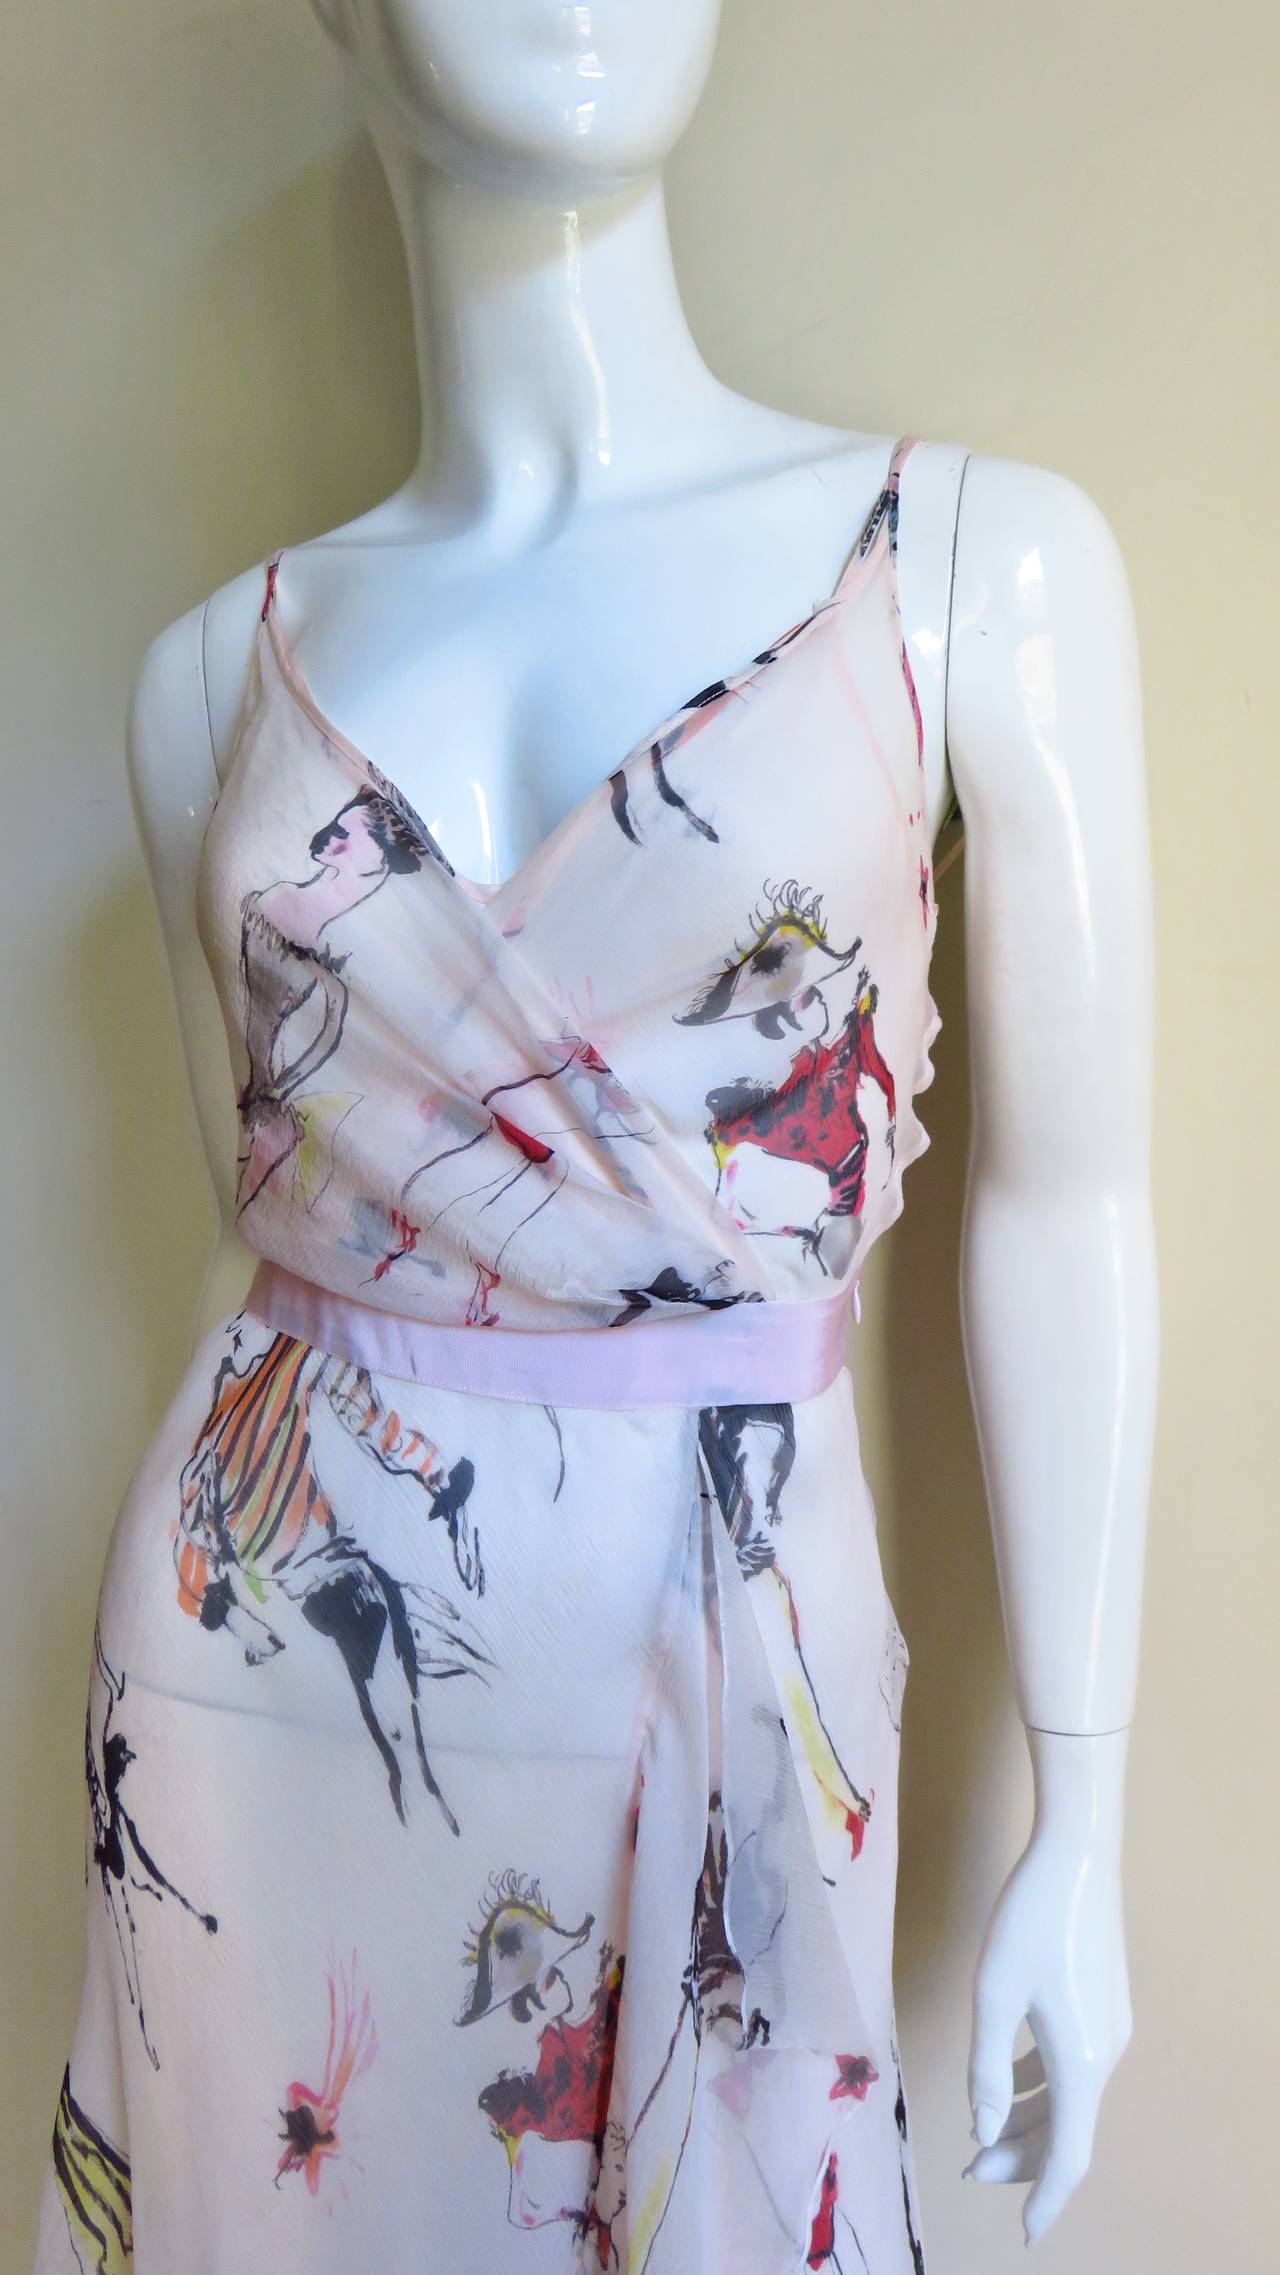 A lovely ethereal dress and matching slip in pale shell pink covered with sketches of people dressed up in costumes drawn in black, red and pink from Moschino.  The slip style dress has a wrap bodice with a matching grosgrain ribbon waist and a